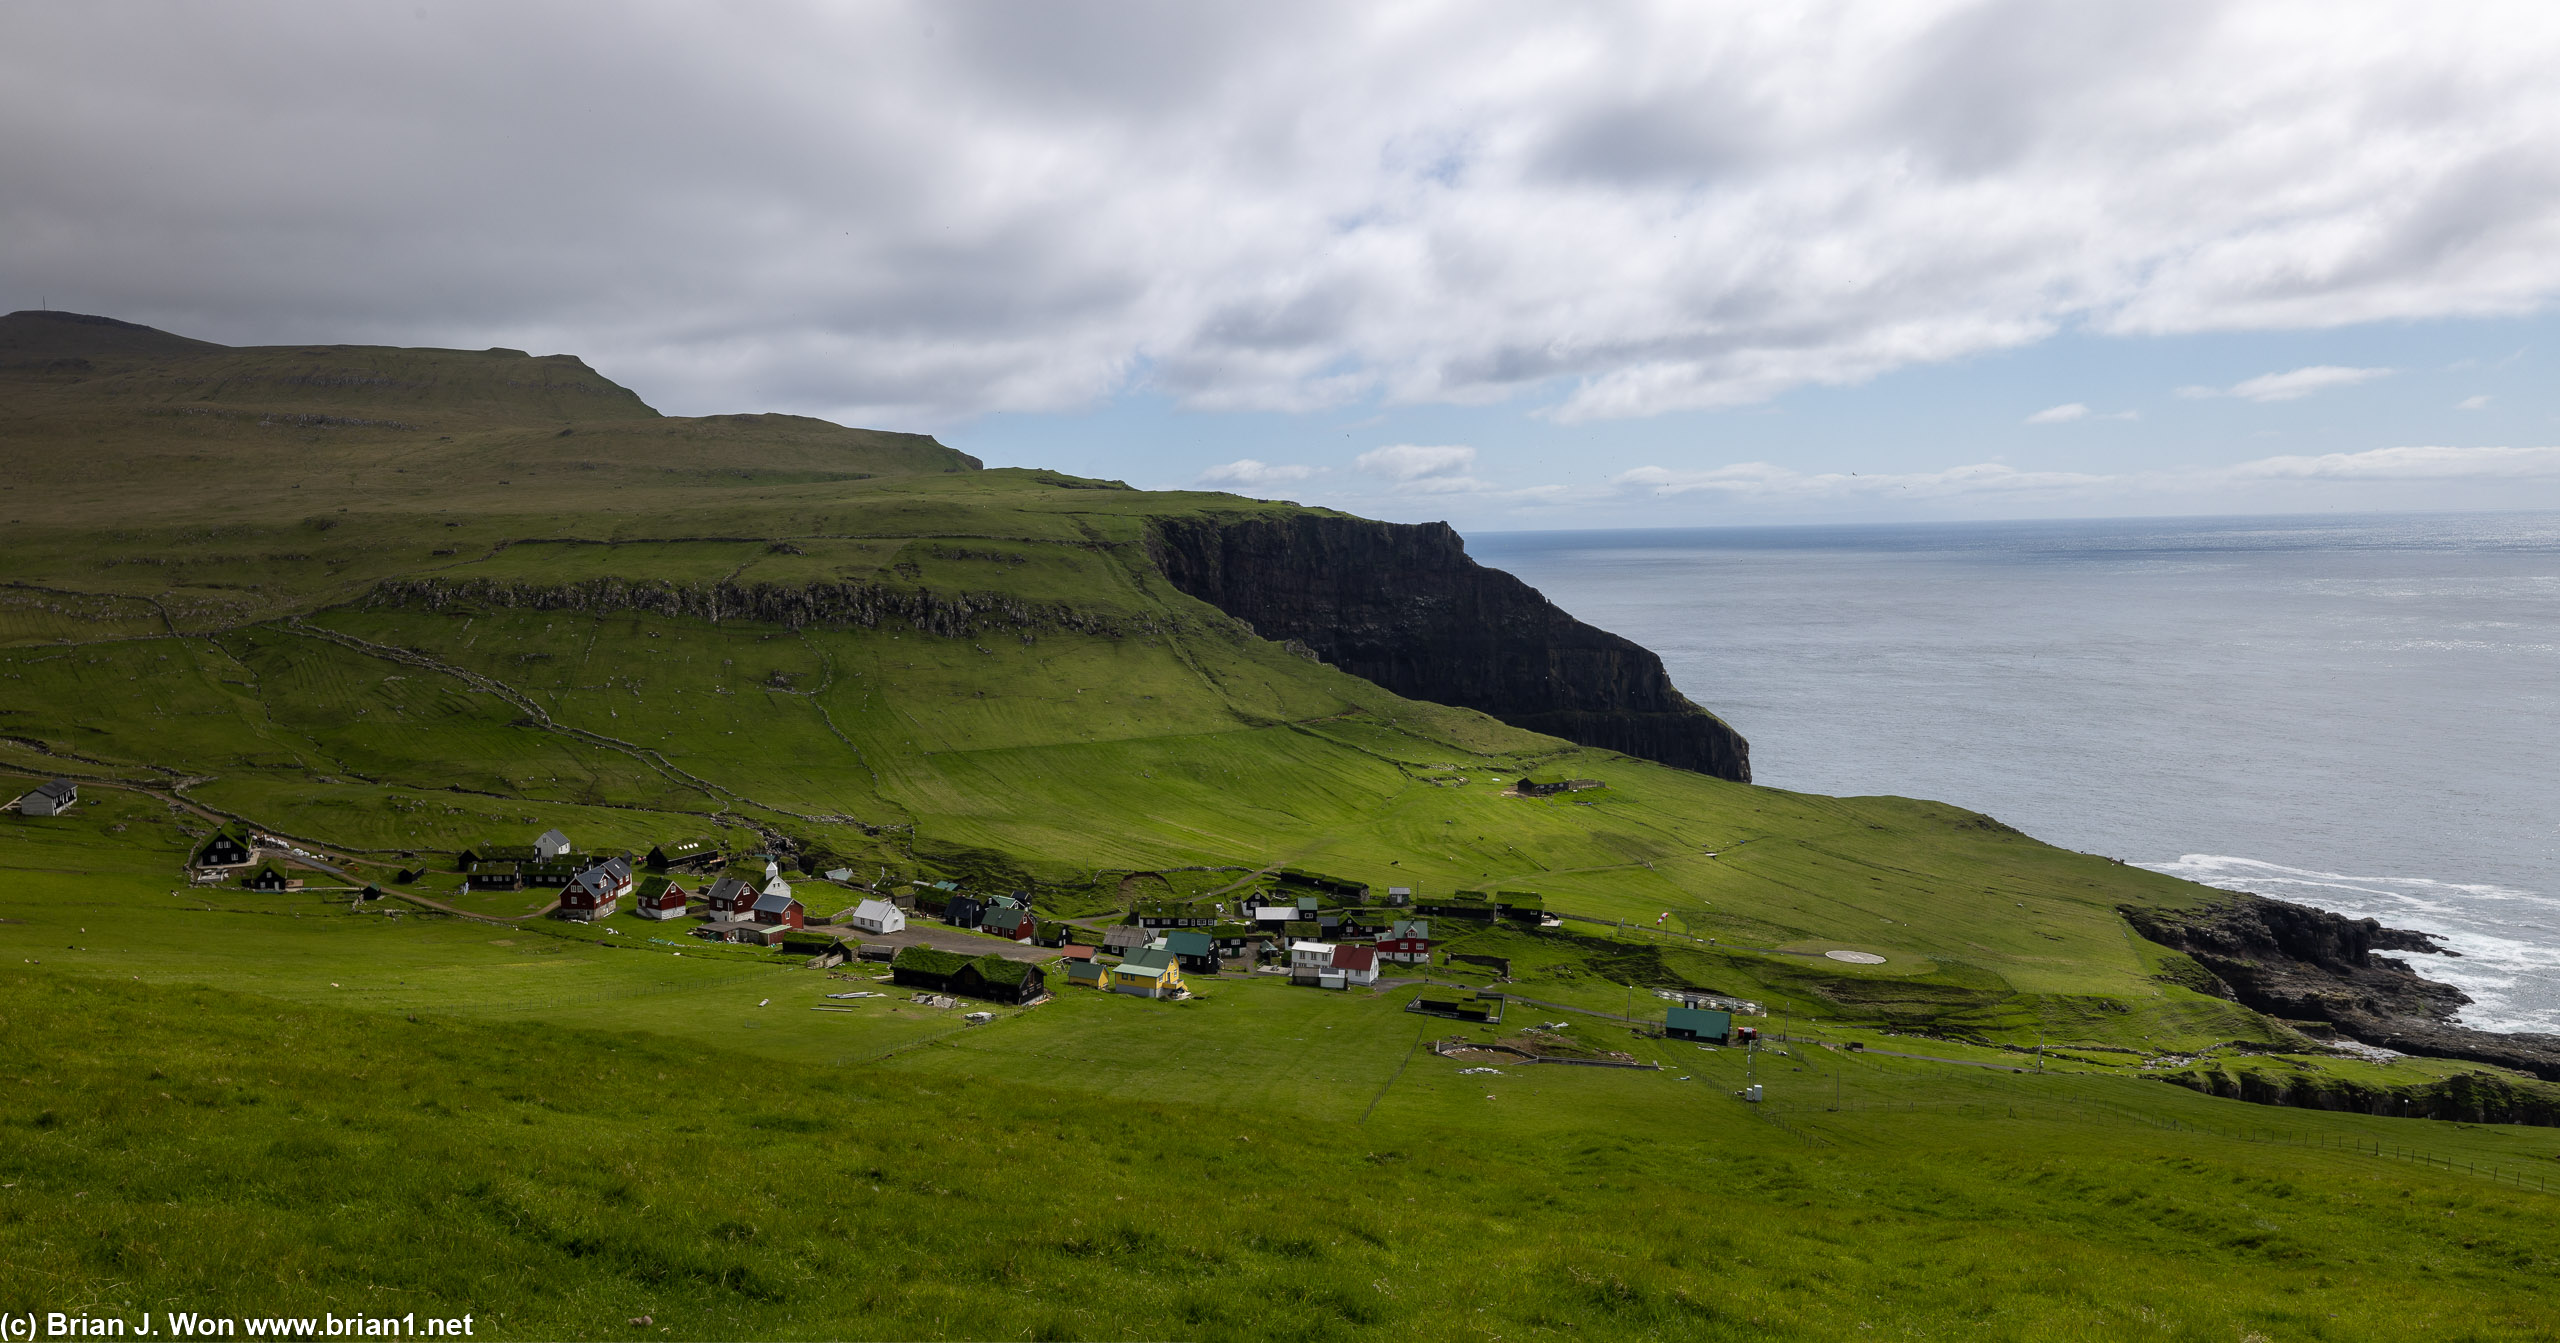 Looking south at the tiny village on Mykines Island.